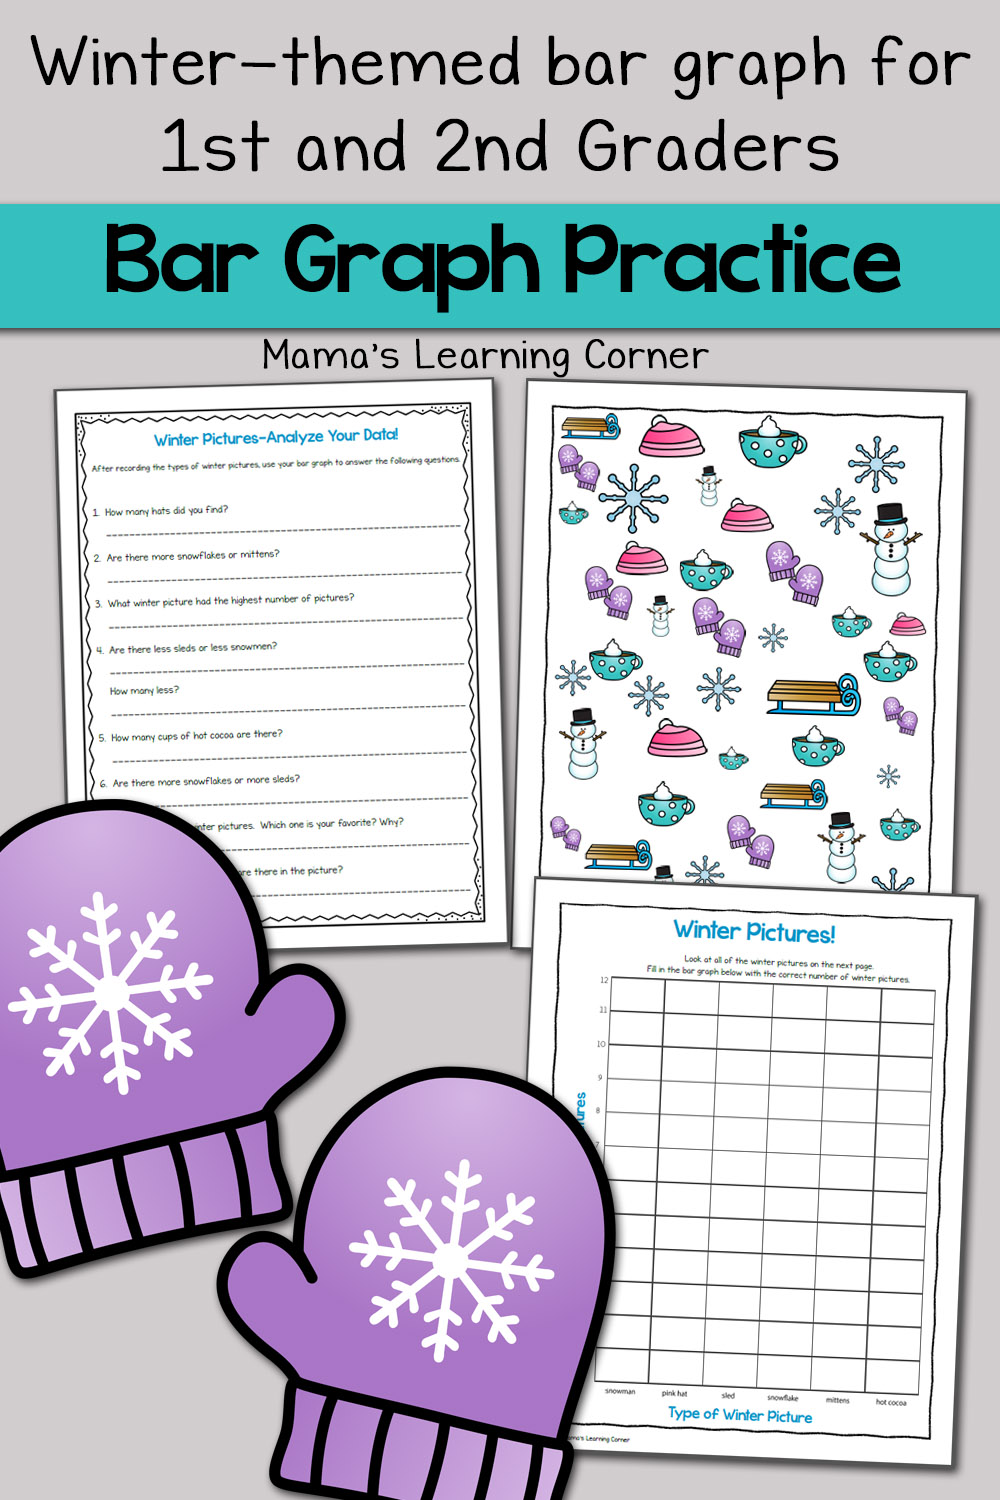 Winter Picture Bar Graph Worksheets